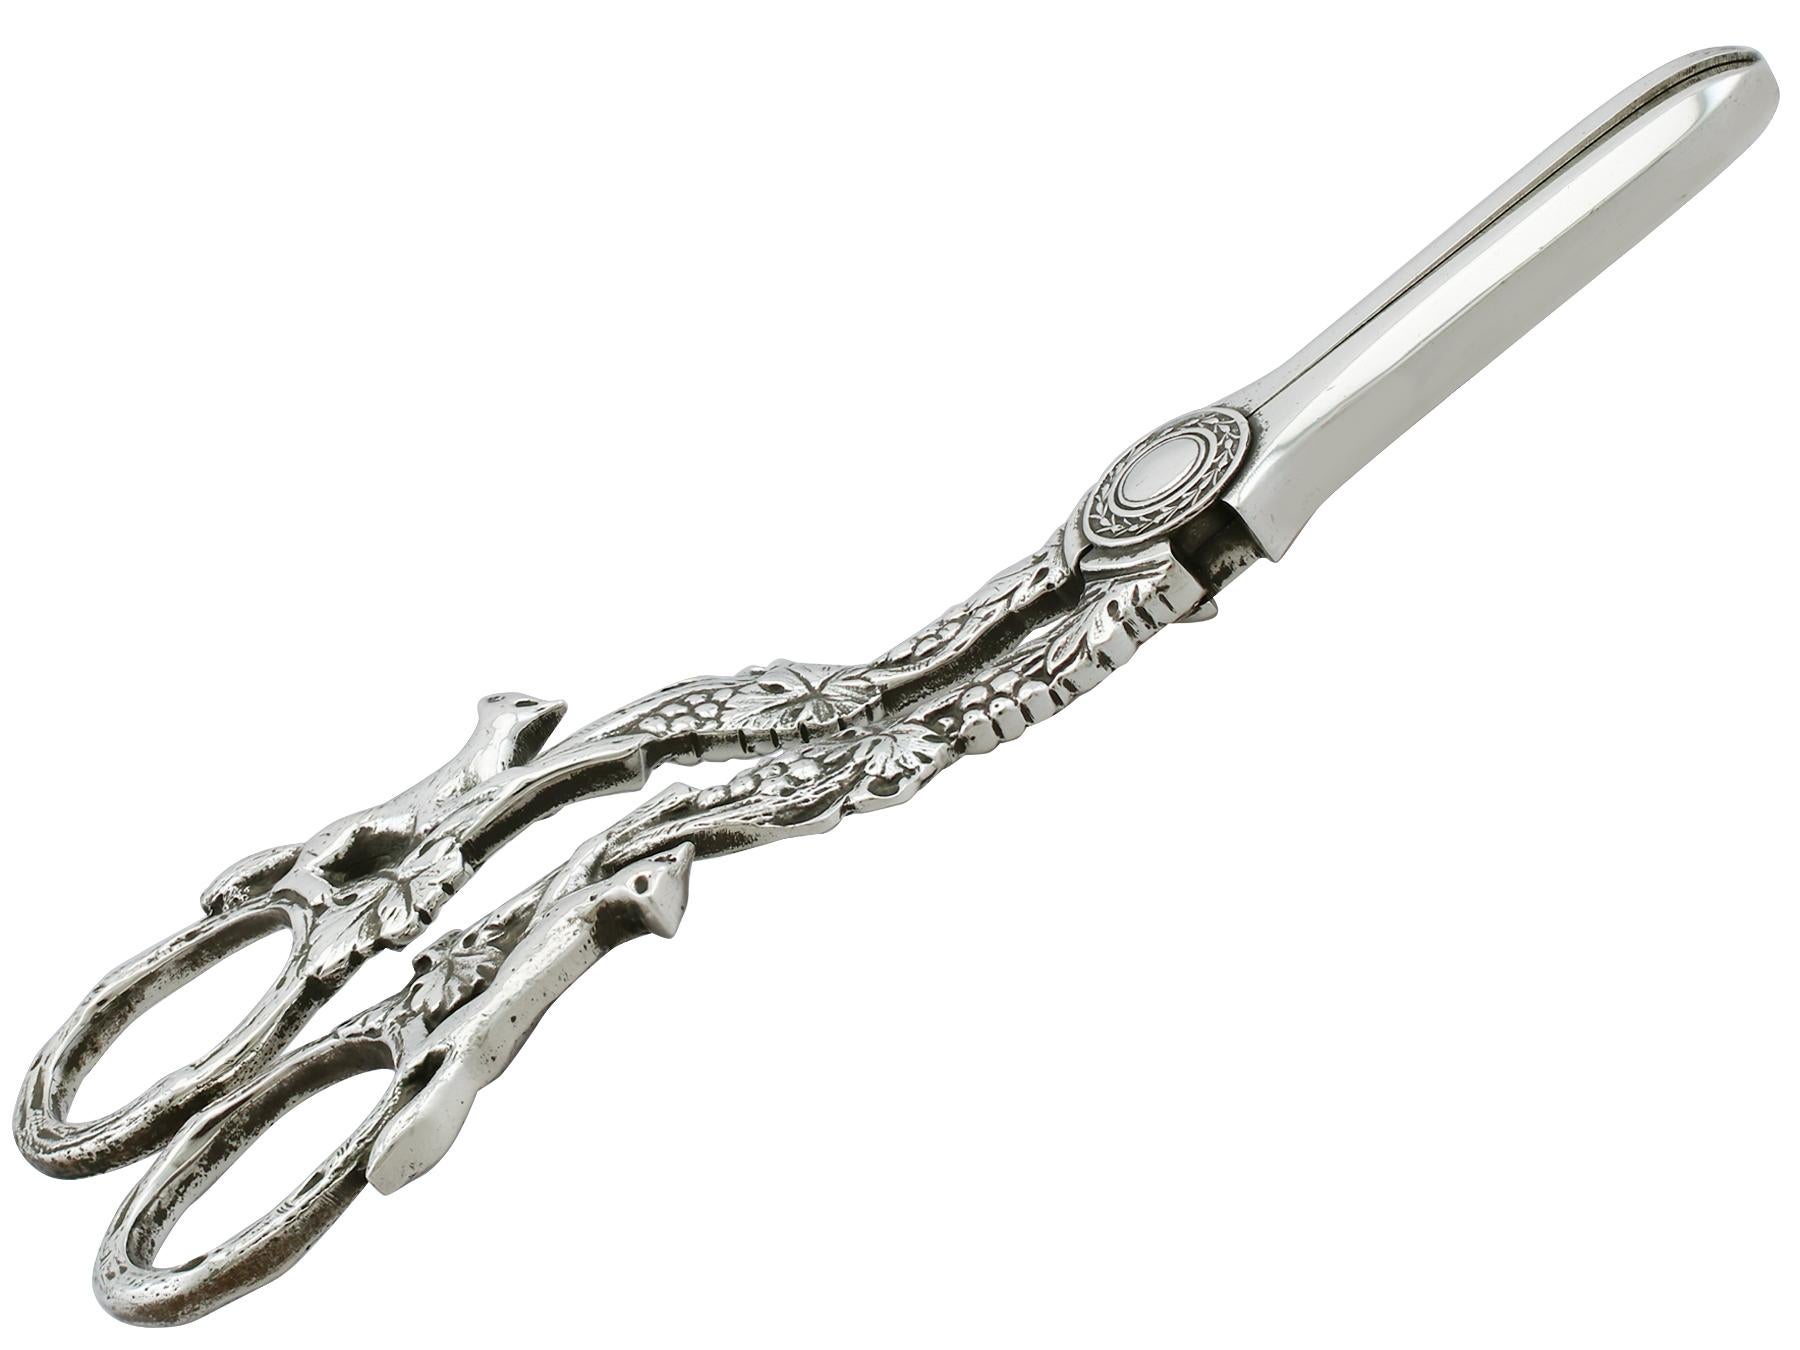 An exceptional, fine and impressive pair of vitnage Elizabeth II English sterling silver grape shears; an addition to our silver flatware collection.

This exceptional pair of vintage silver grape shears, in sterling standard, has a hinged scissor